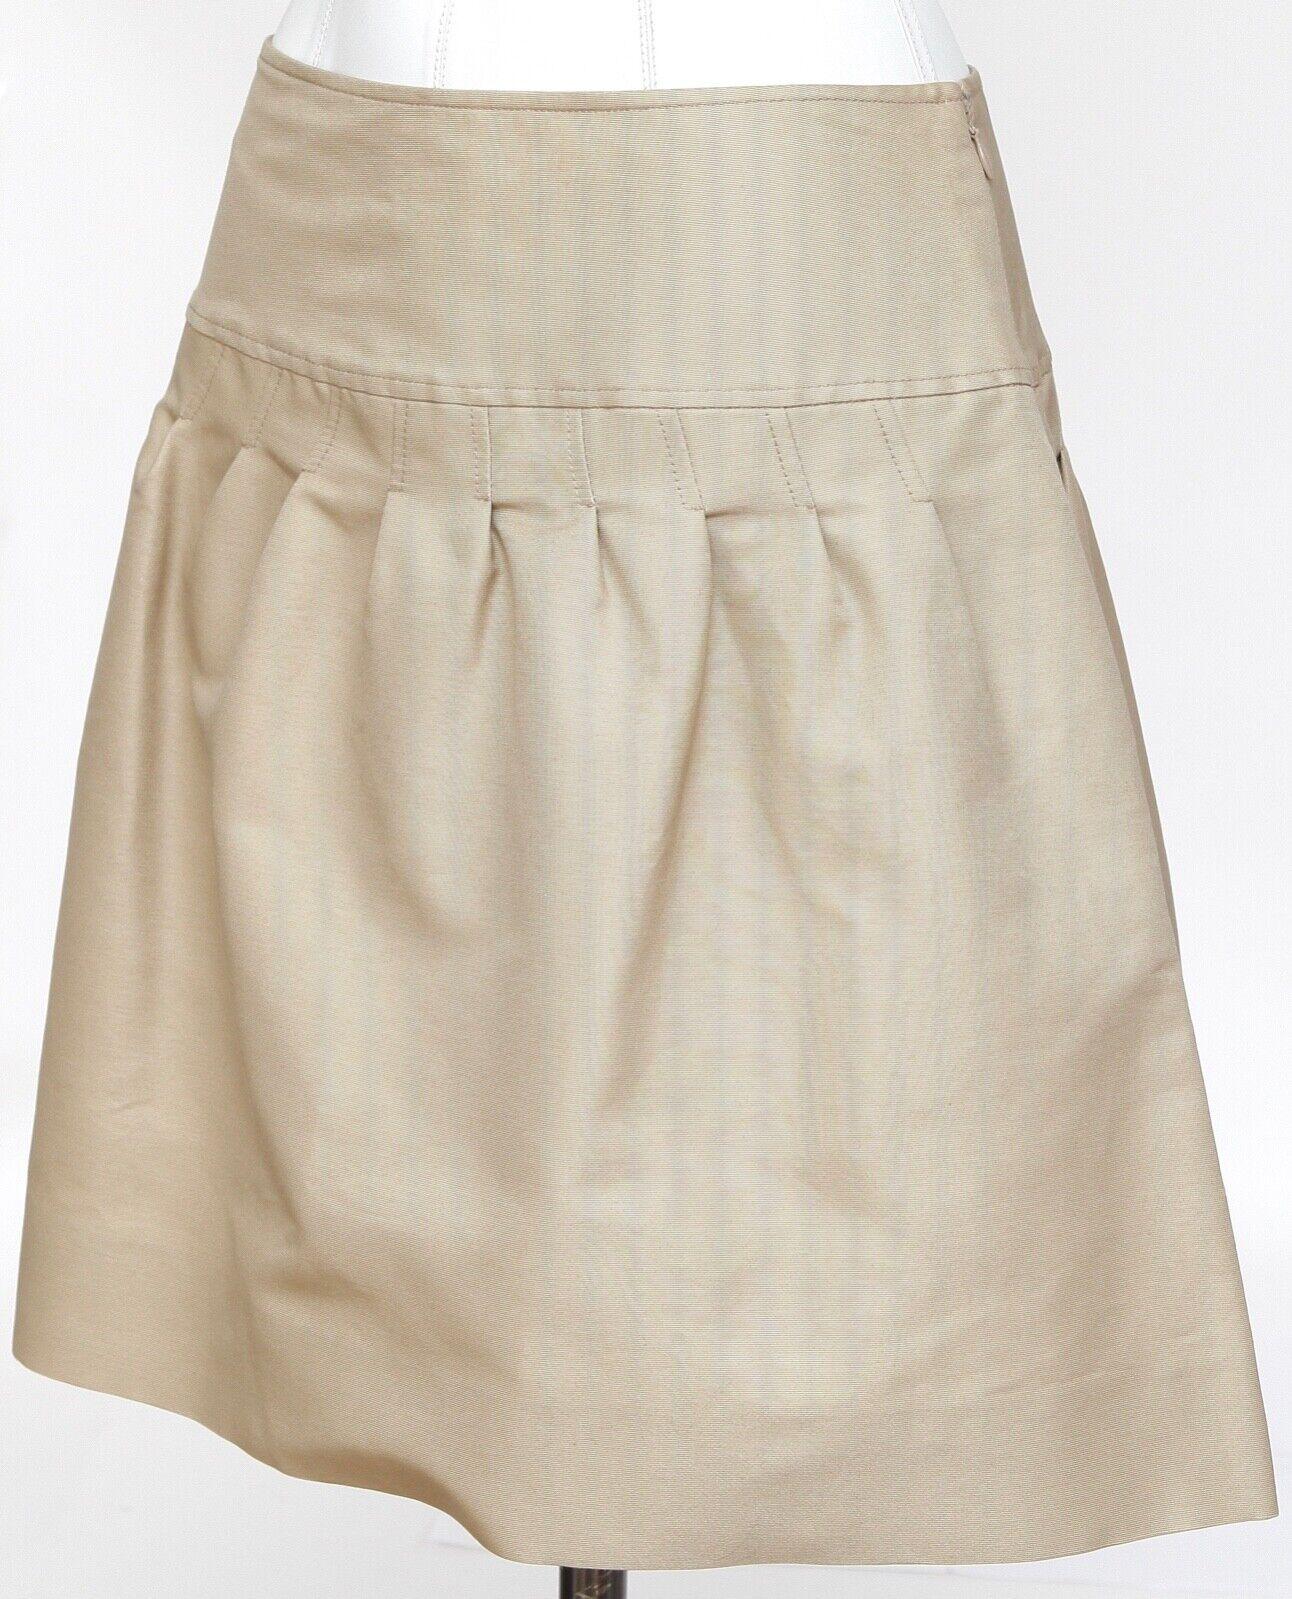 VALENTINO Skirt Beige A-Line Above Knee Cotton Silk Sz 4 BNWT $980 In New Condition For Sale In Hollywood, FL